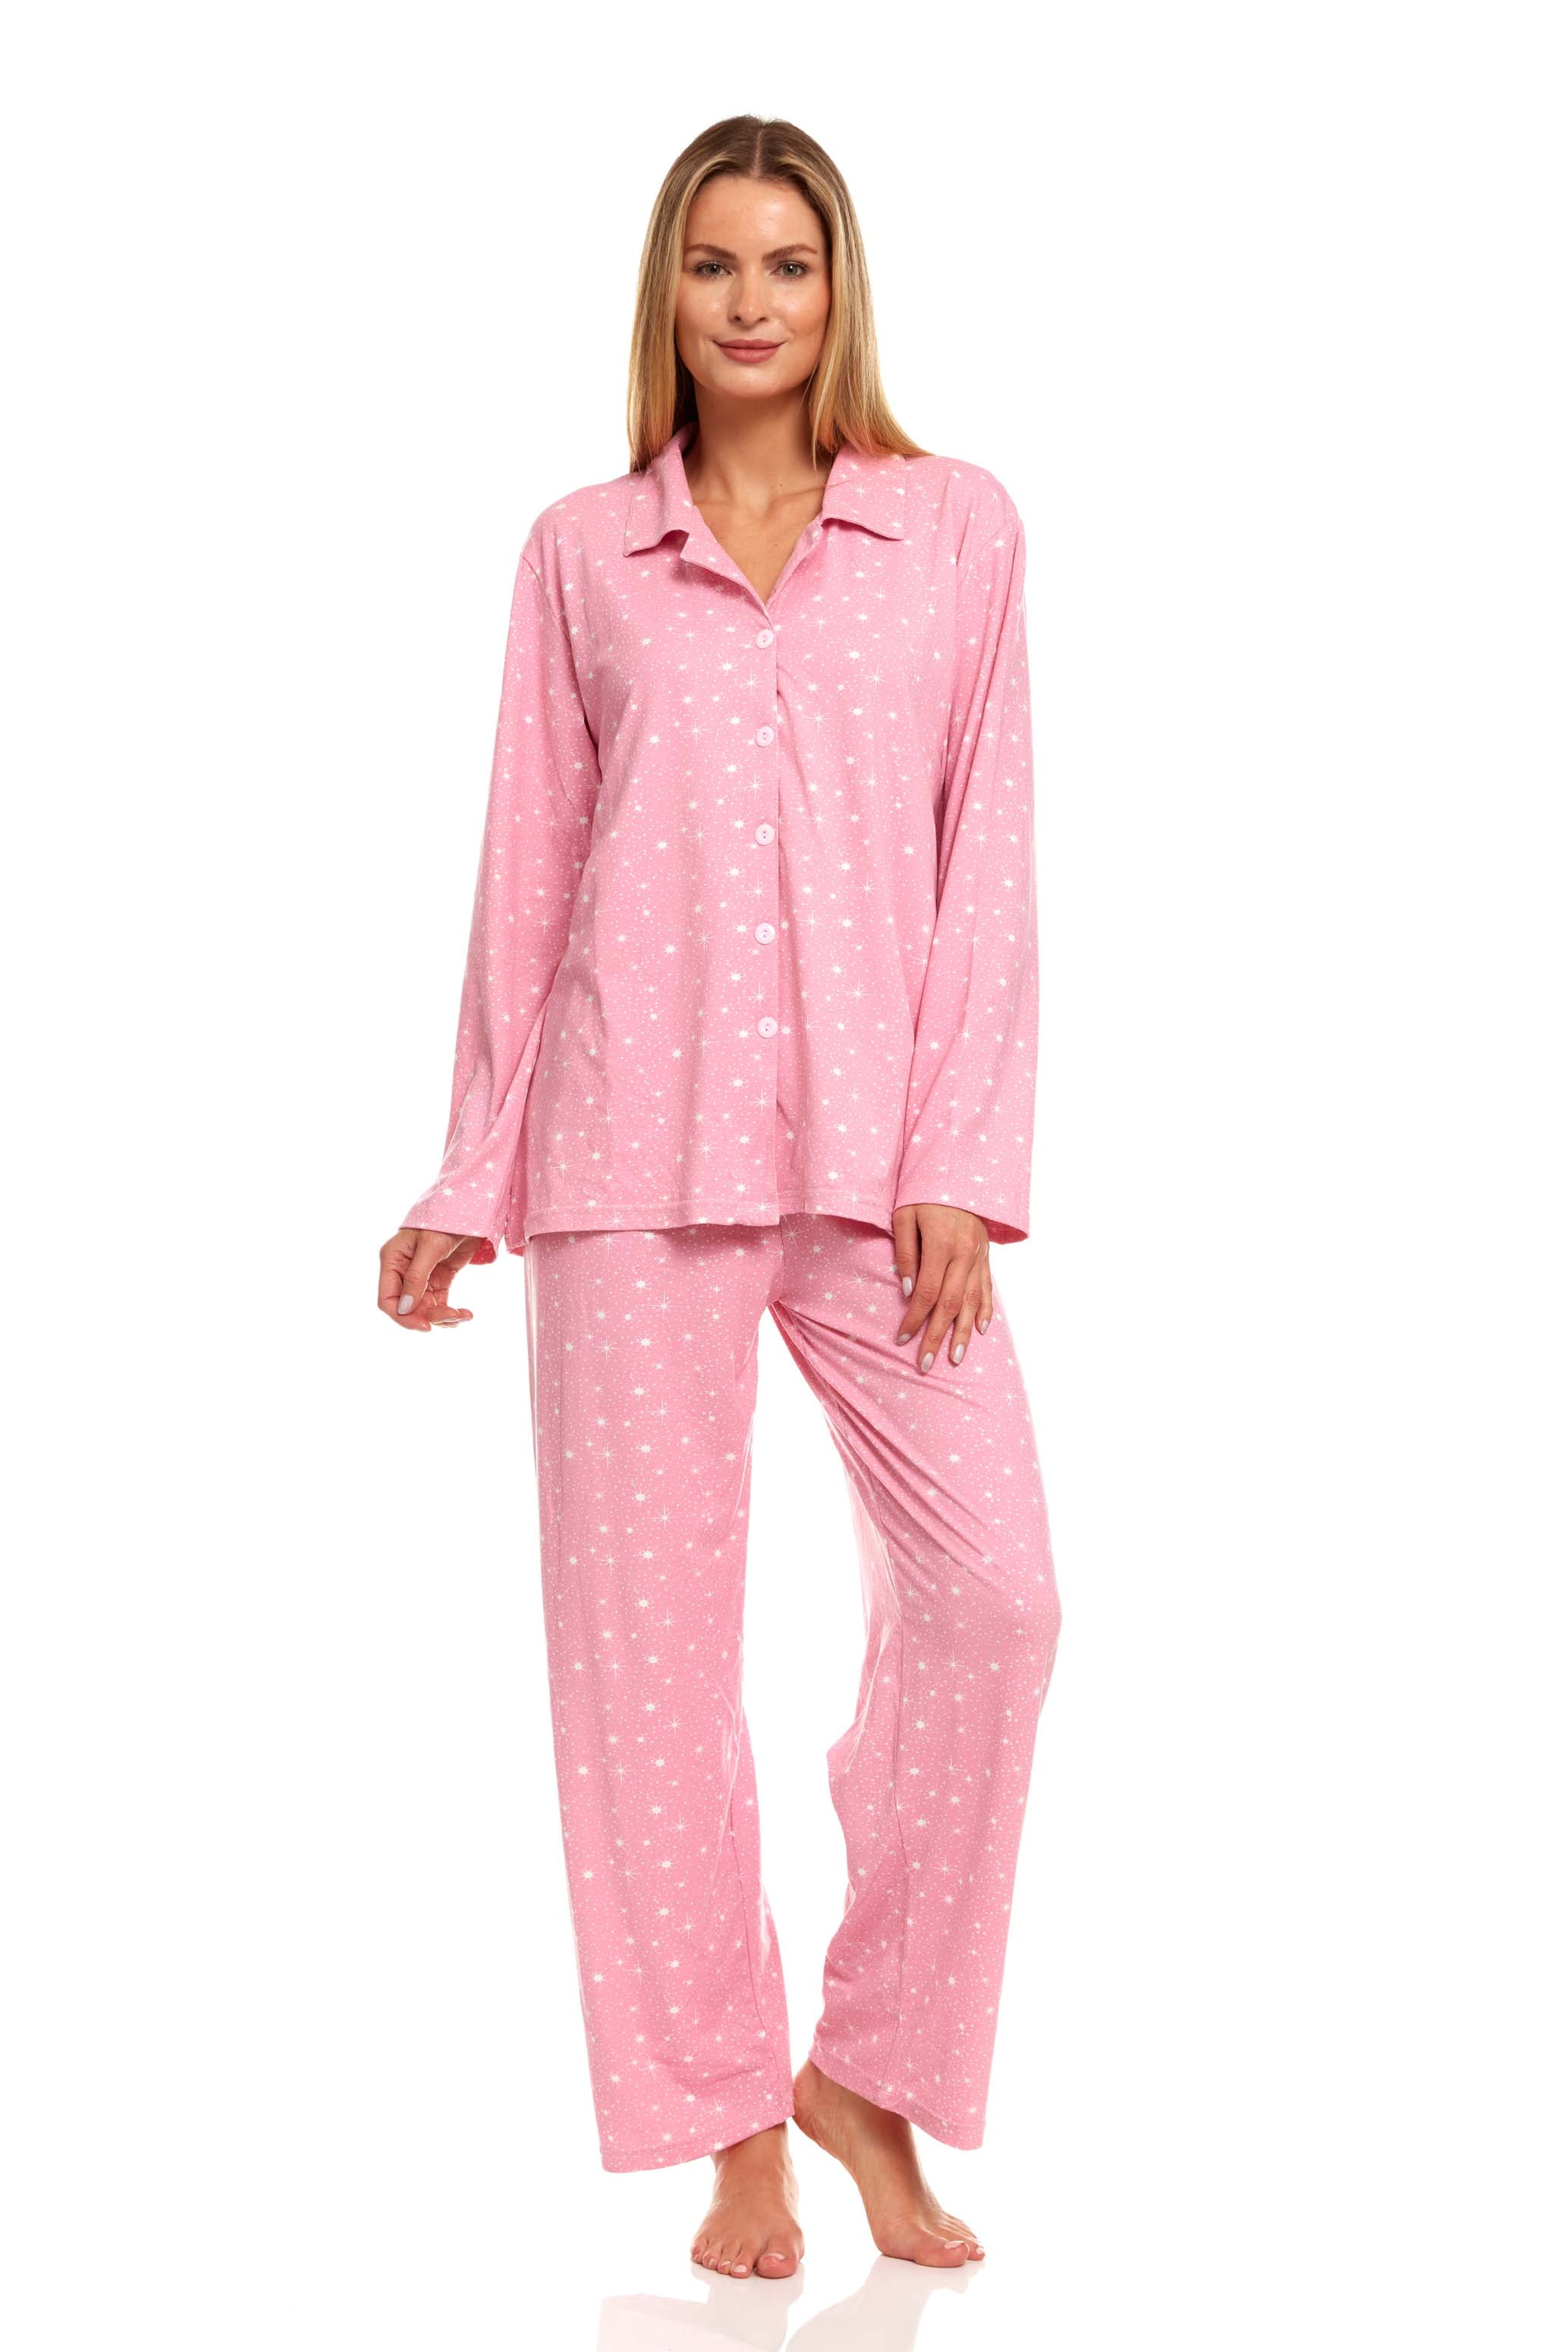 Women's Summer Pajamas ~ Pin By Brittney Robin On Morning | Showtainment